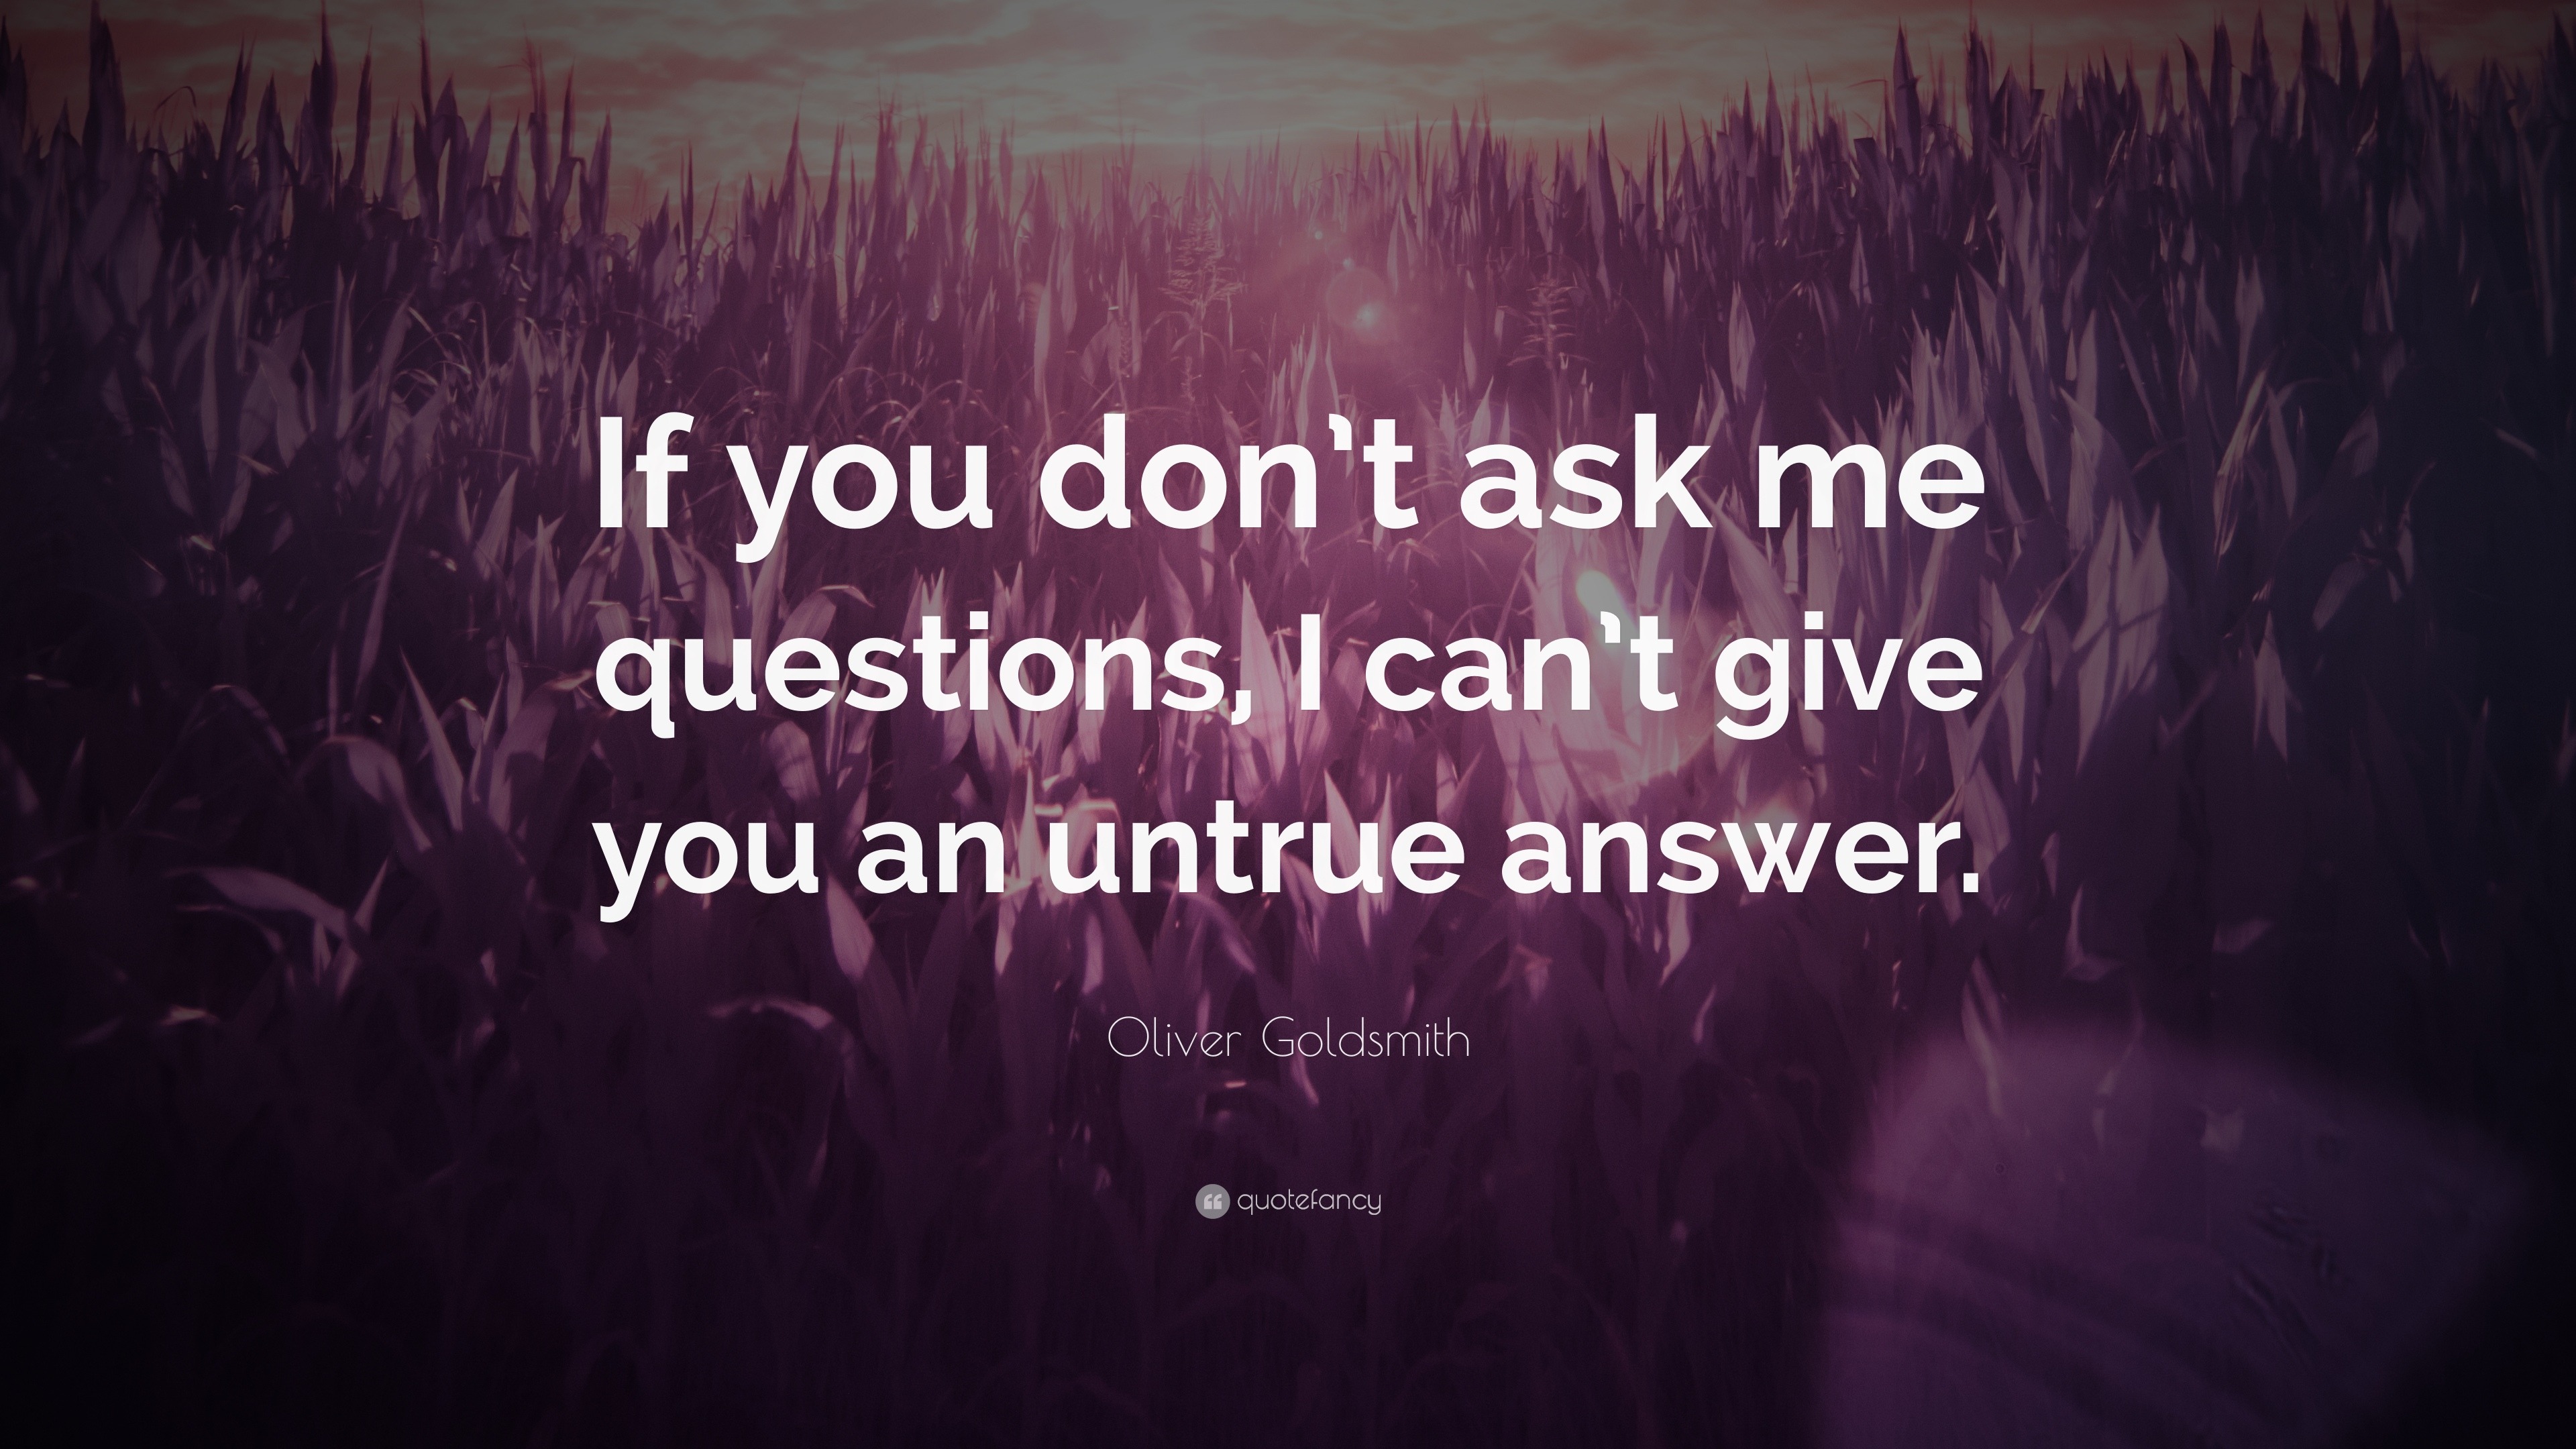 Oliver Goldsmith Quote: “If you don’t ask me questions, I can’t give ...